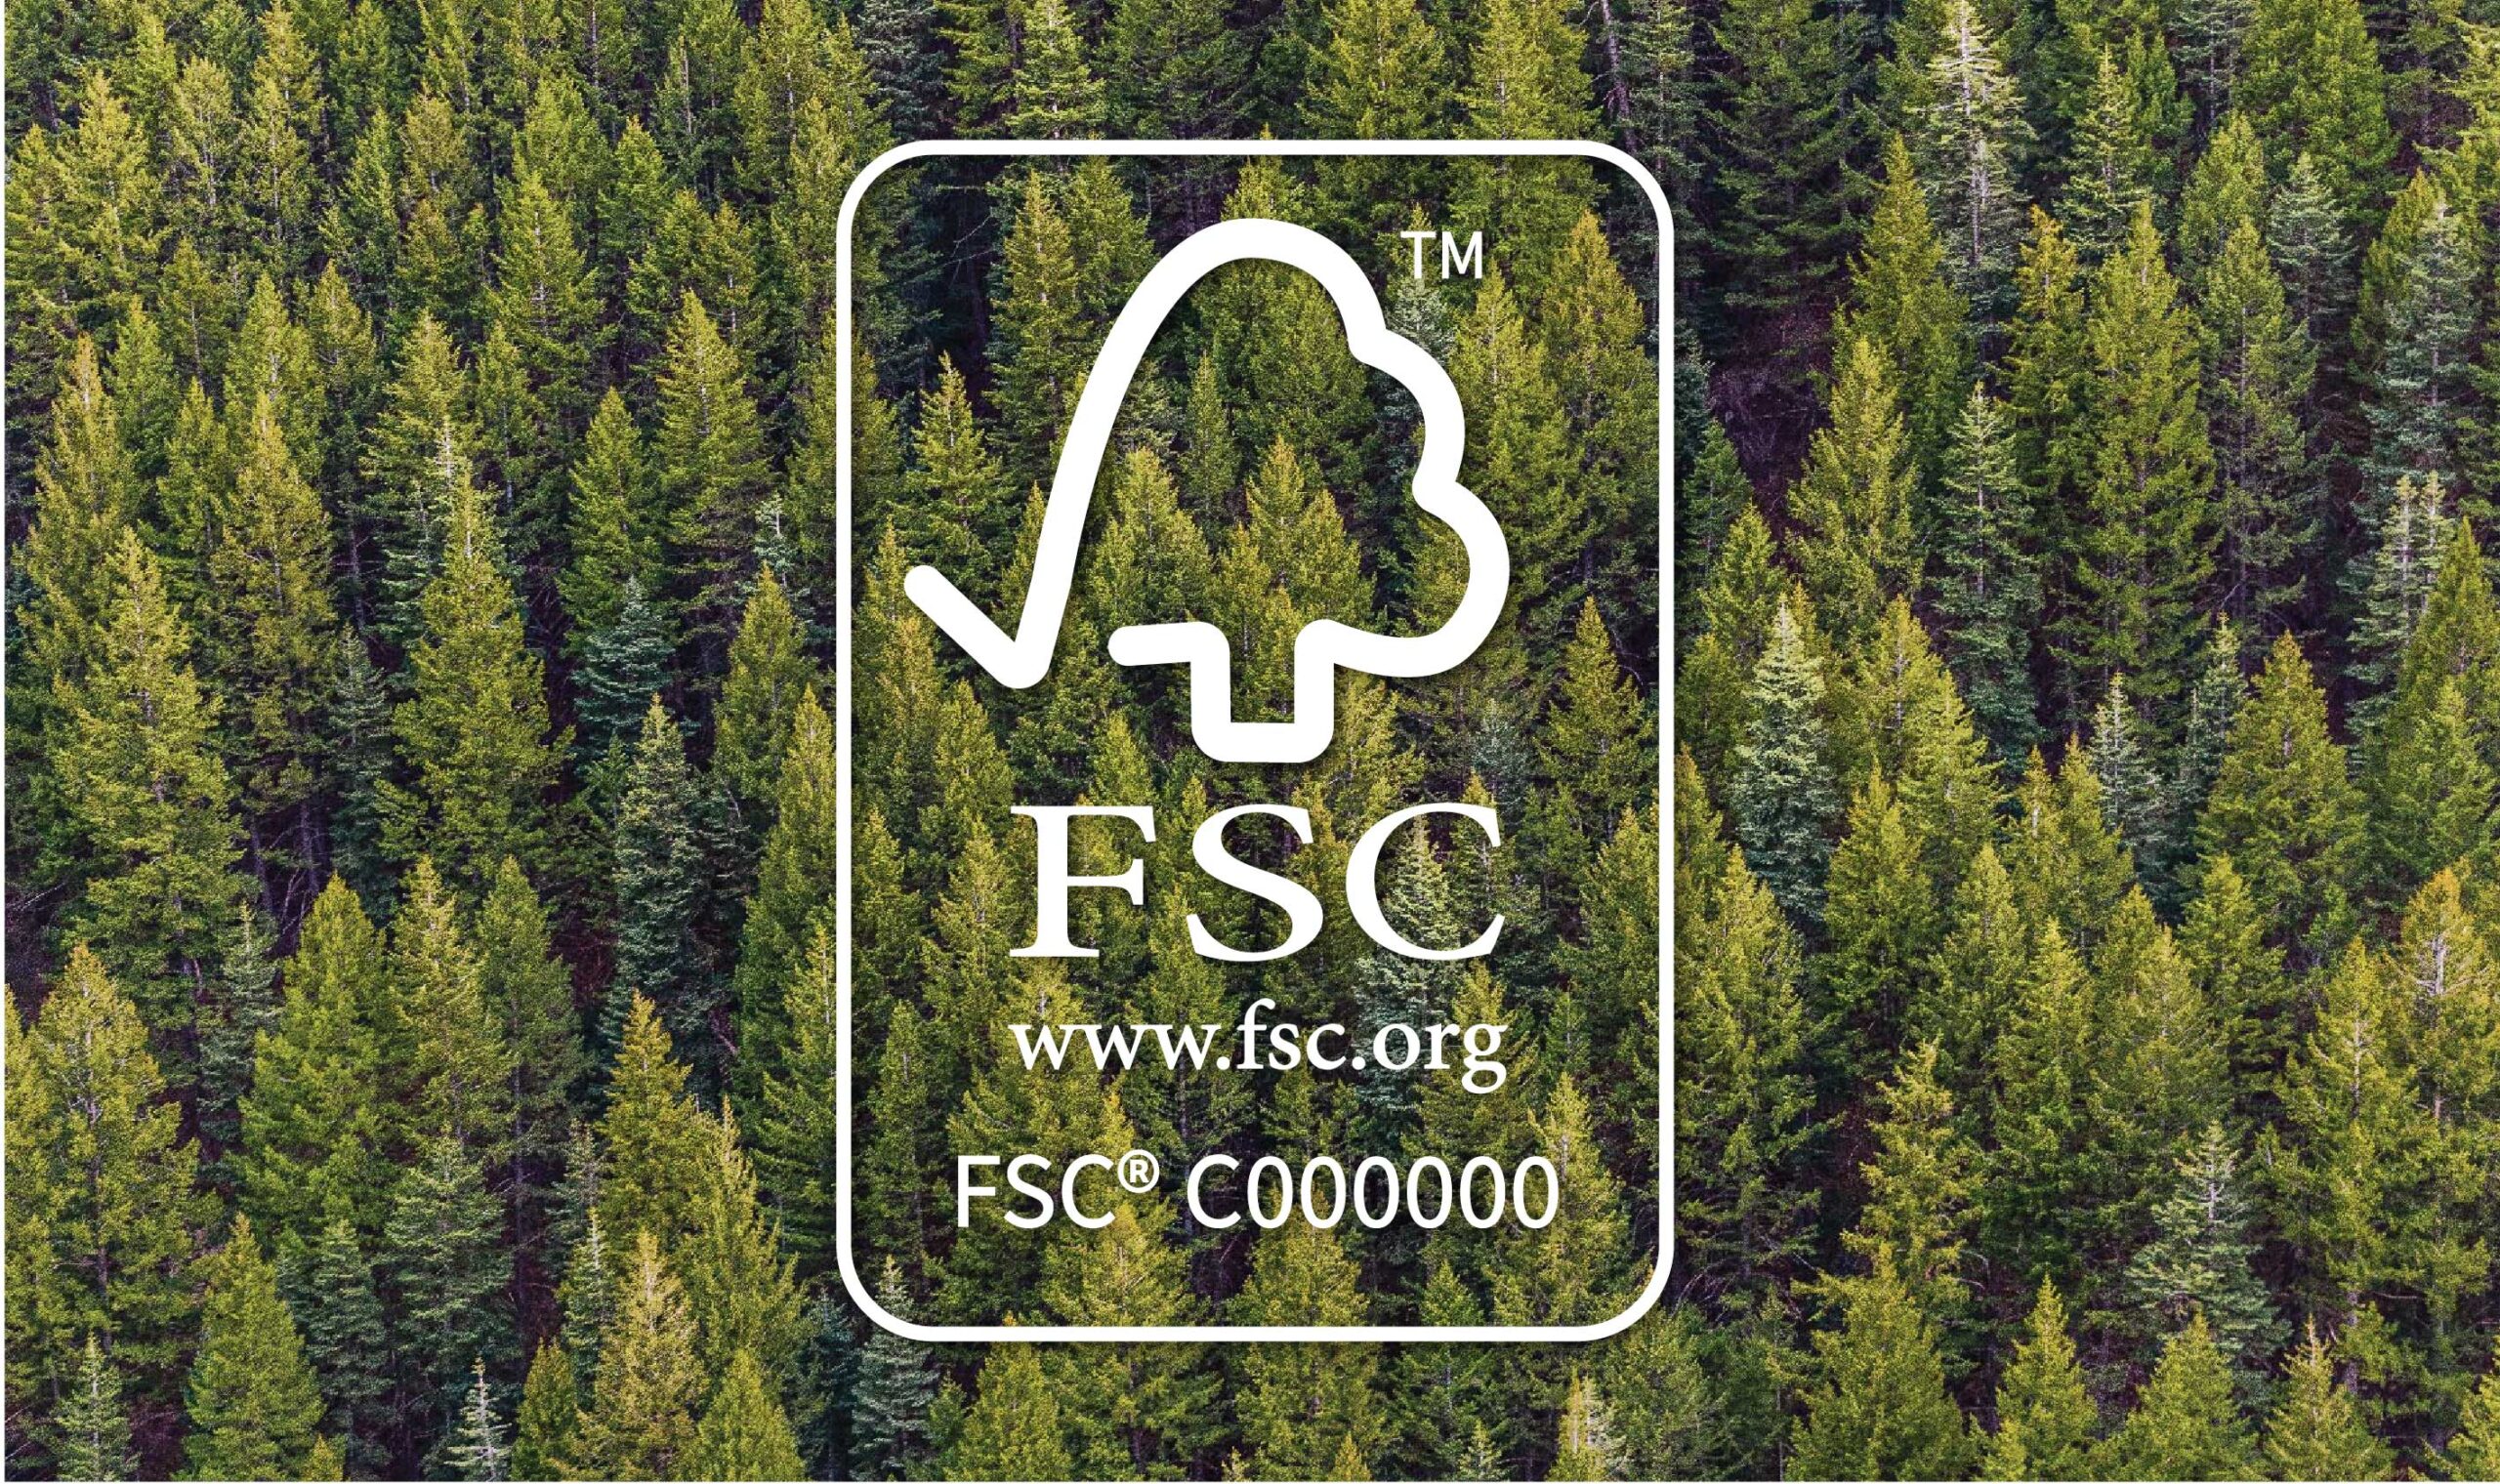 vecteezy_fsc-forest-stewardship-council-logo-recycling-eco-stock_10886271 [Converted]